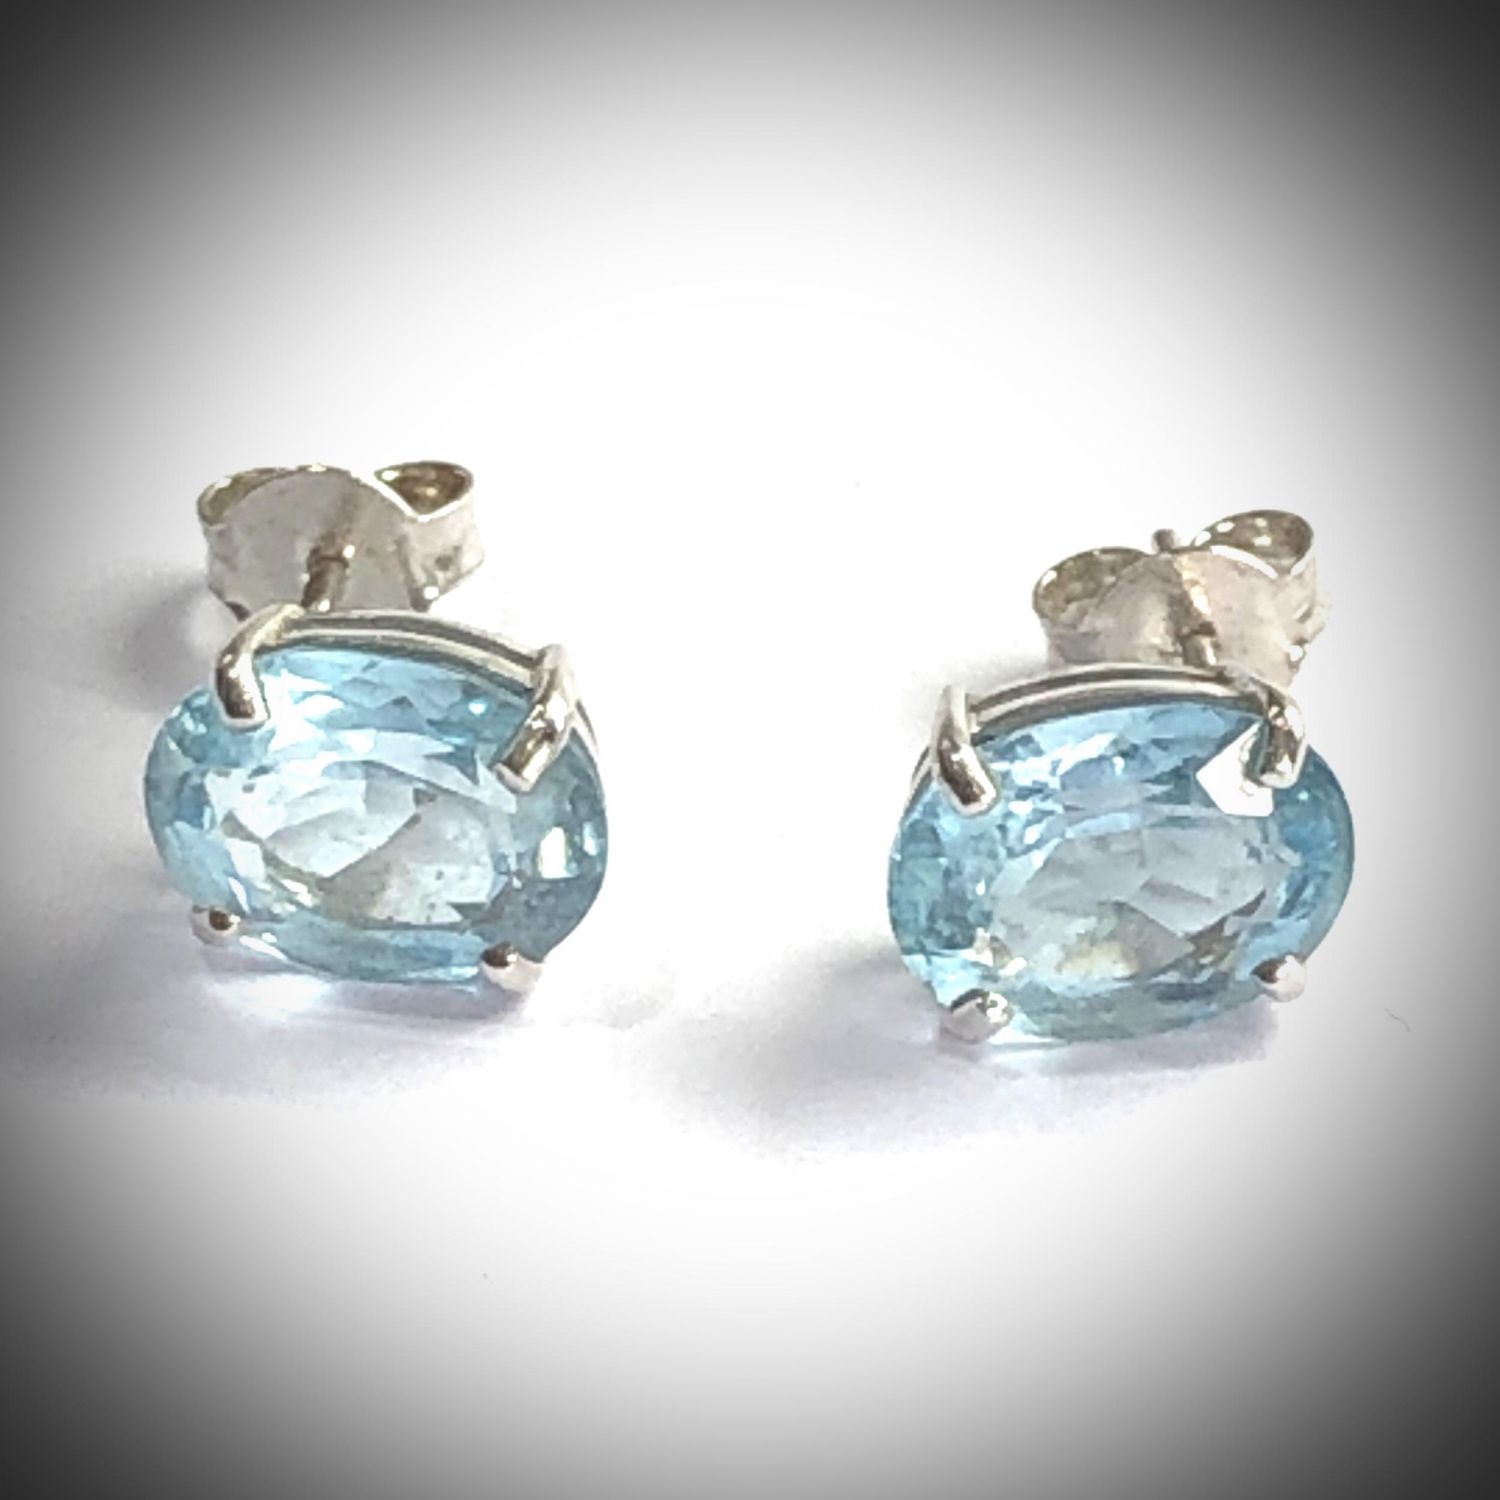 Vintage 9ct white gold and topaz earrings - Jewellery & Gold - Hemswell ...